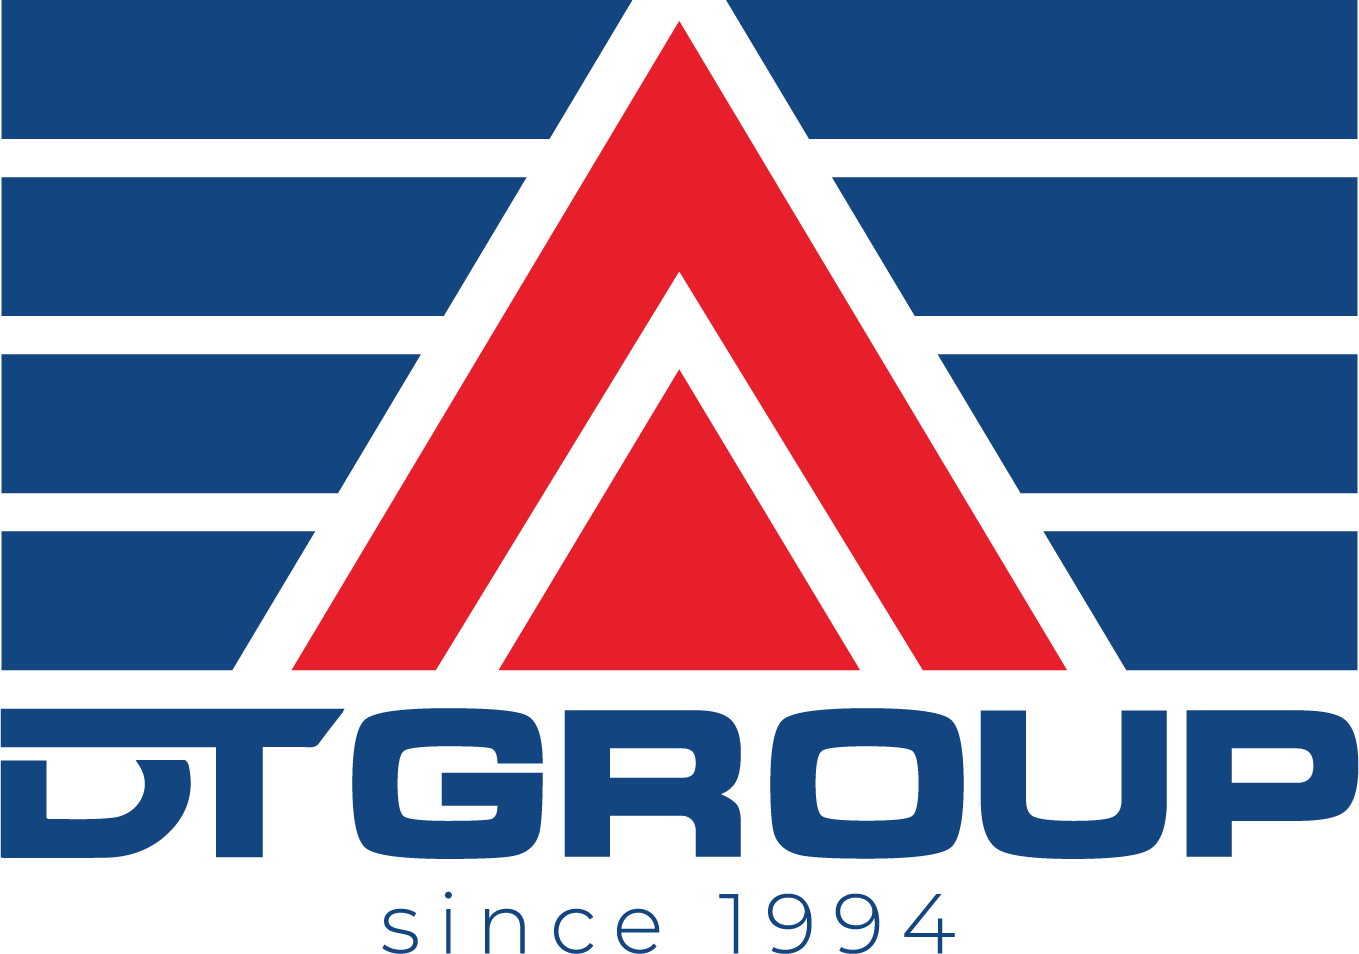 DT GROUP